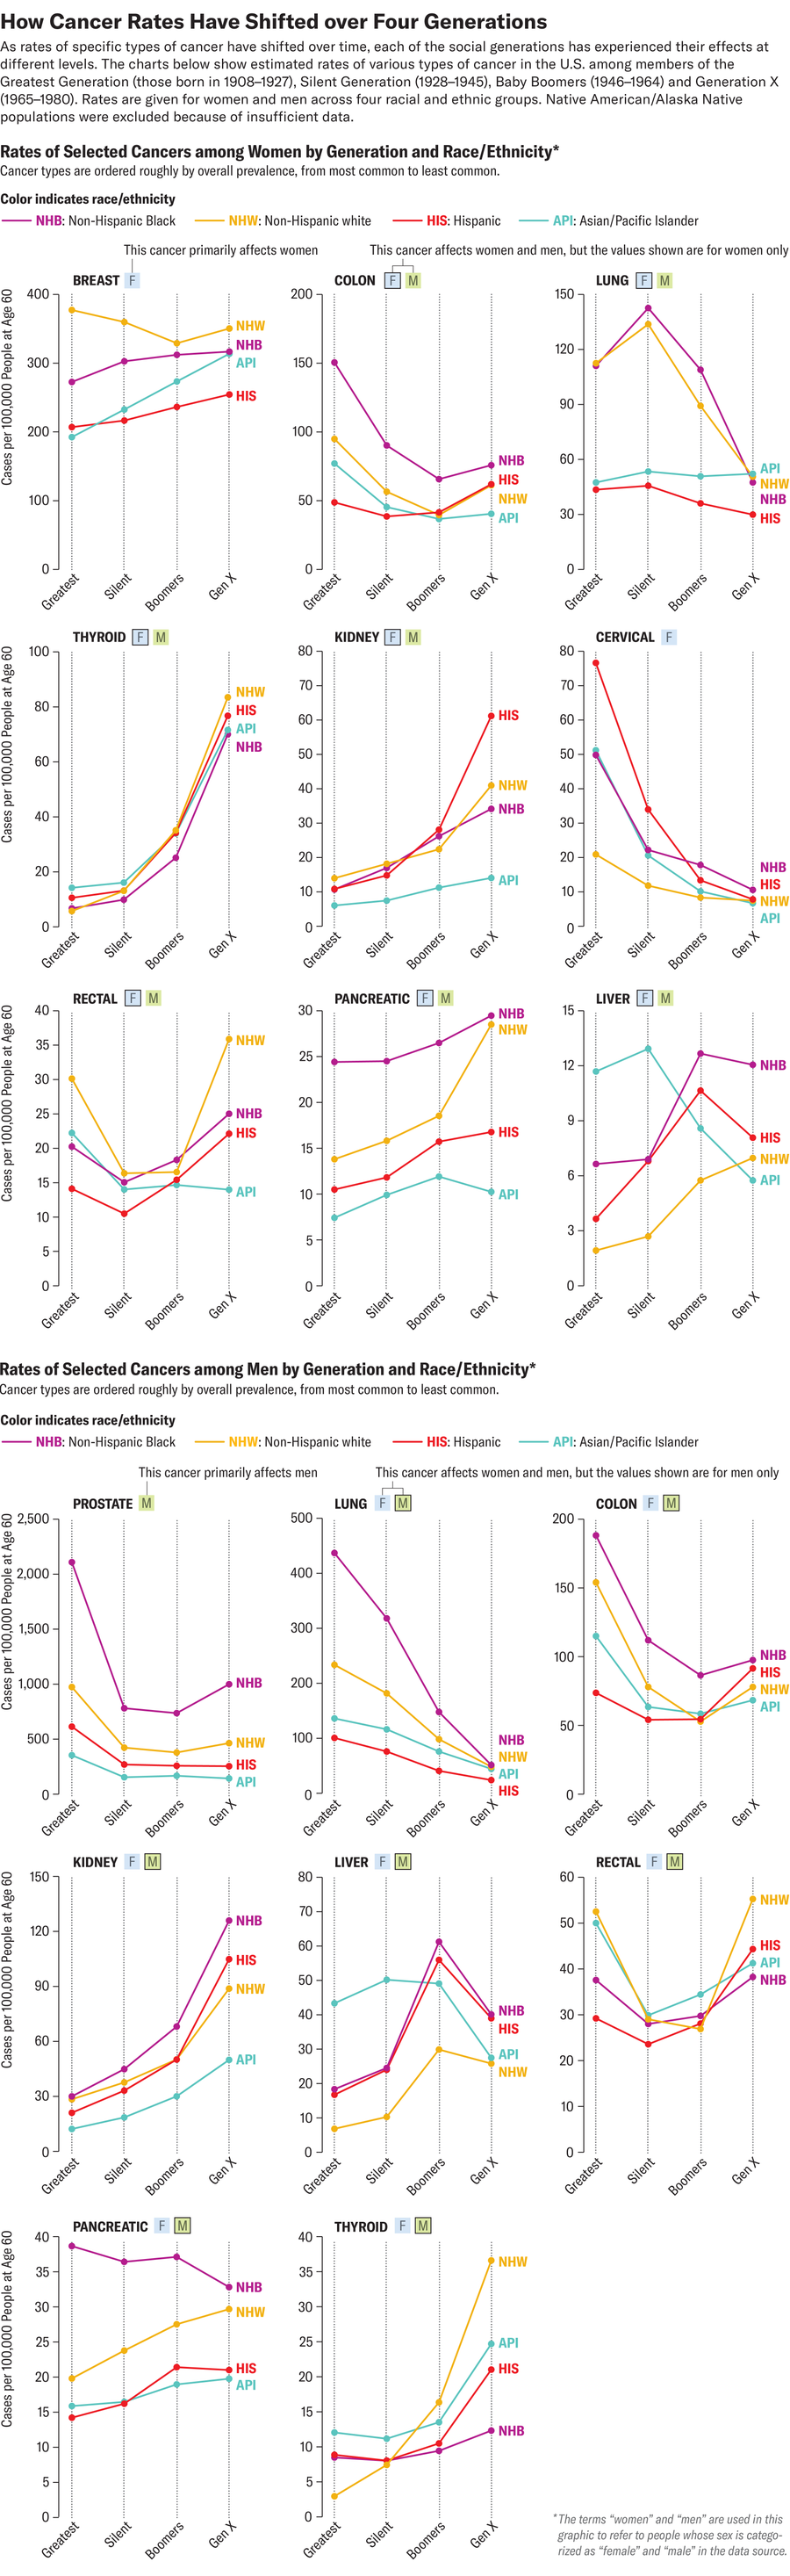 Line charts show estimated rates of selected types of cancer at age 60 for members of the Greatest Generation (those born in 1908–1927), Silent Generation (1928–1945), Baby Boomers (1946–1964) and Generation X (1965–1980), with separate values shown for women and men and four racial and ethnic groups.